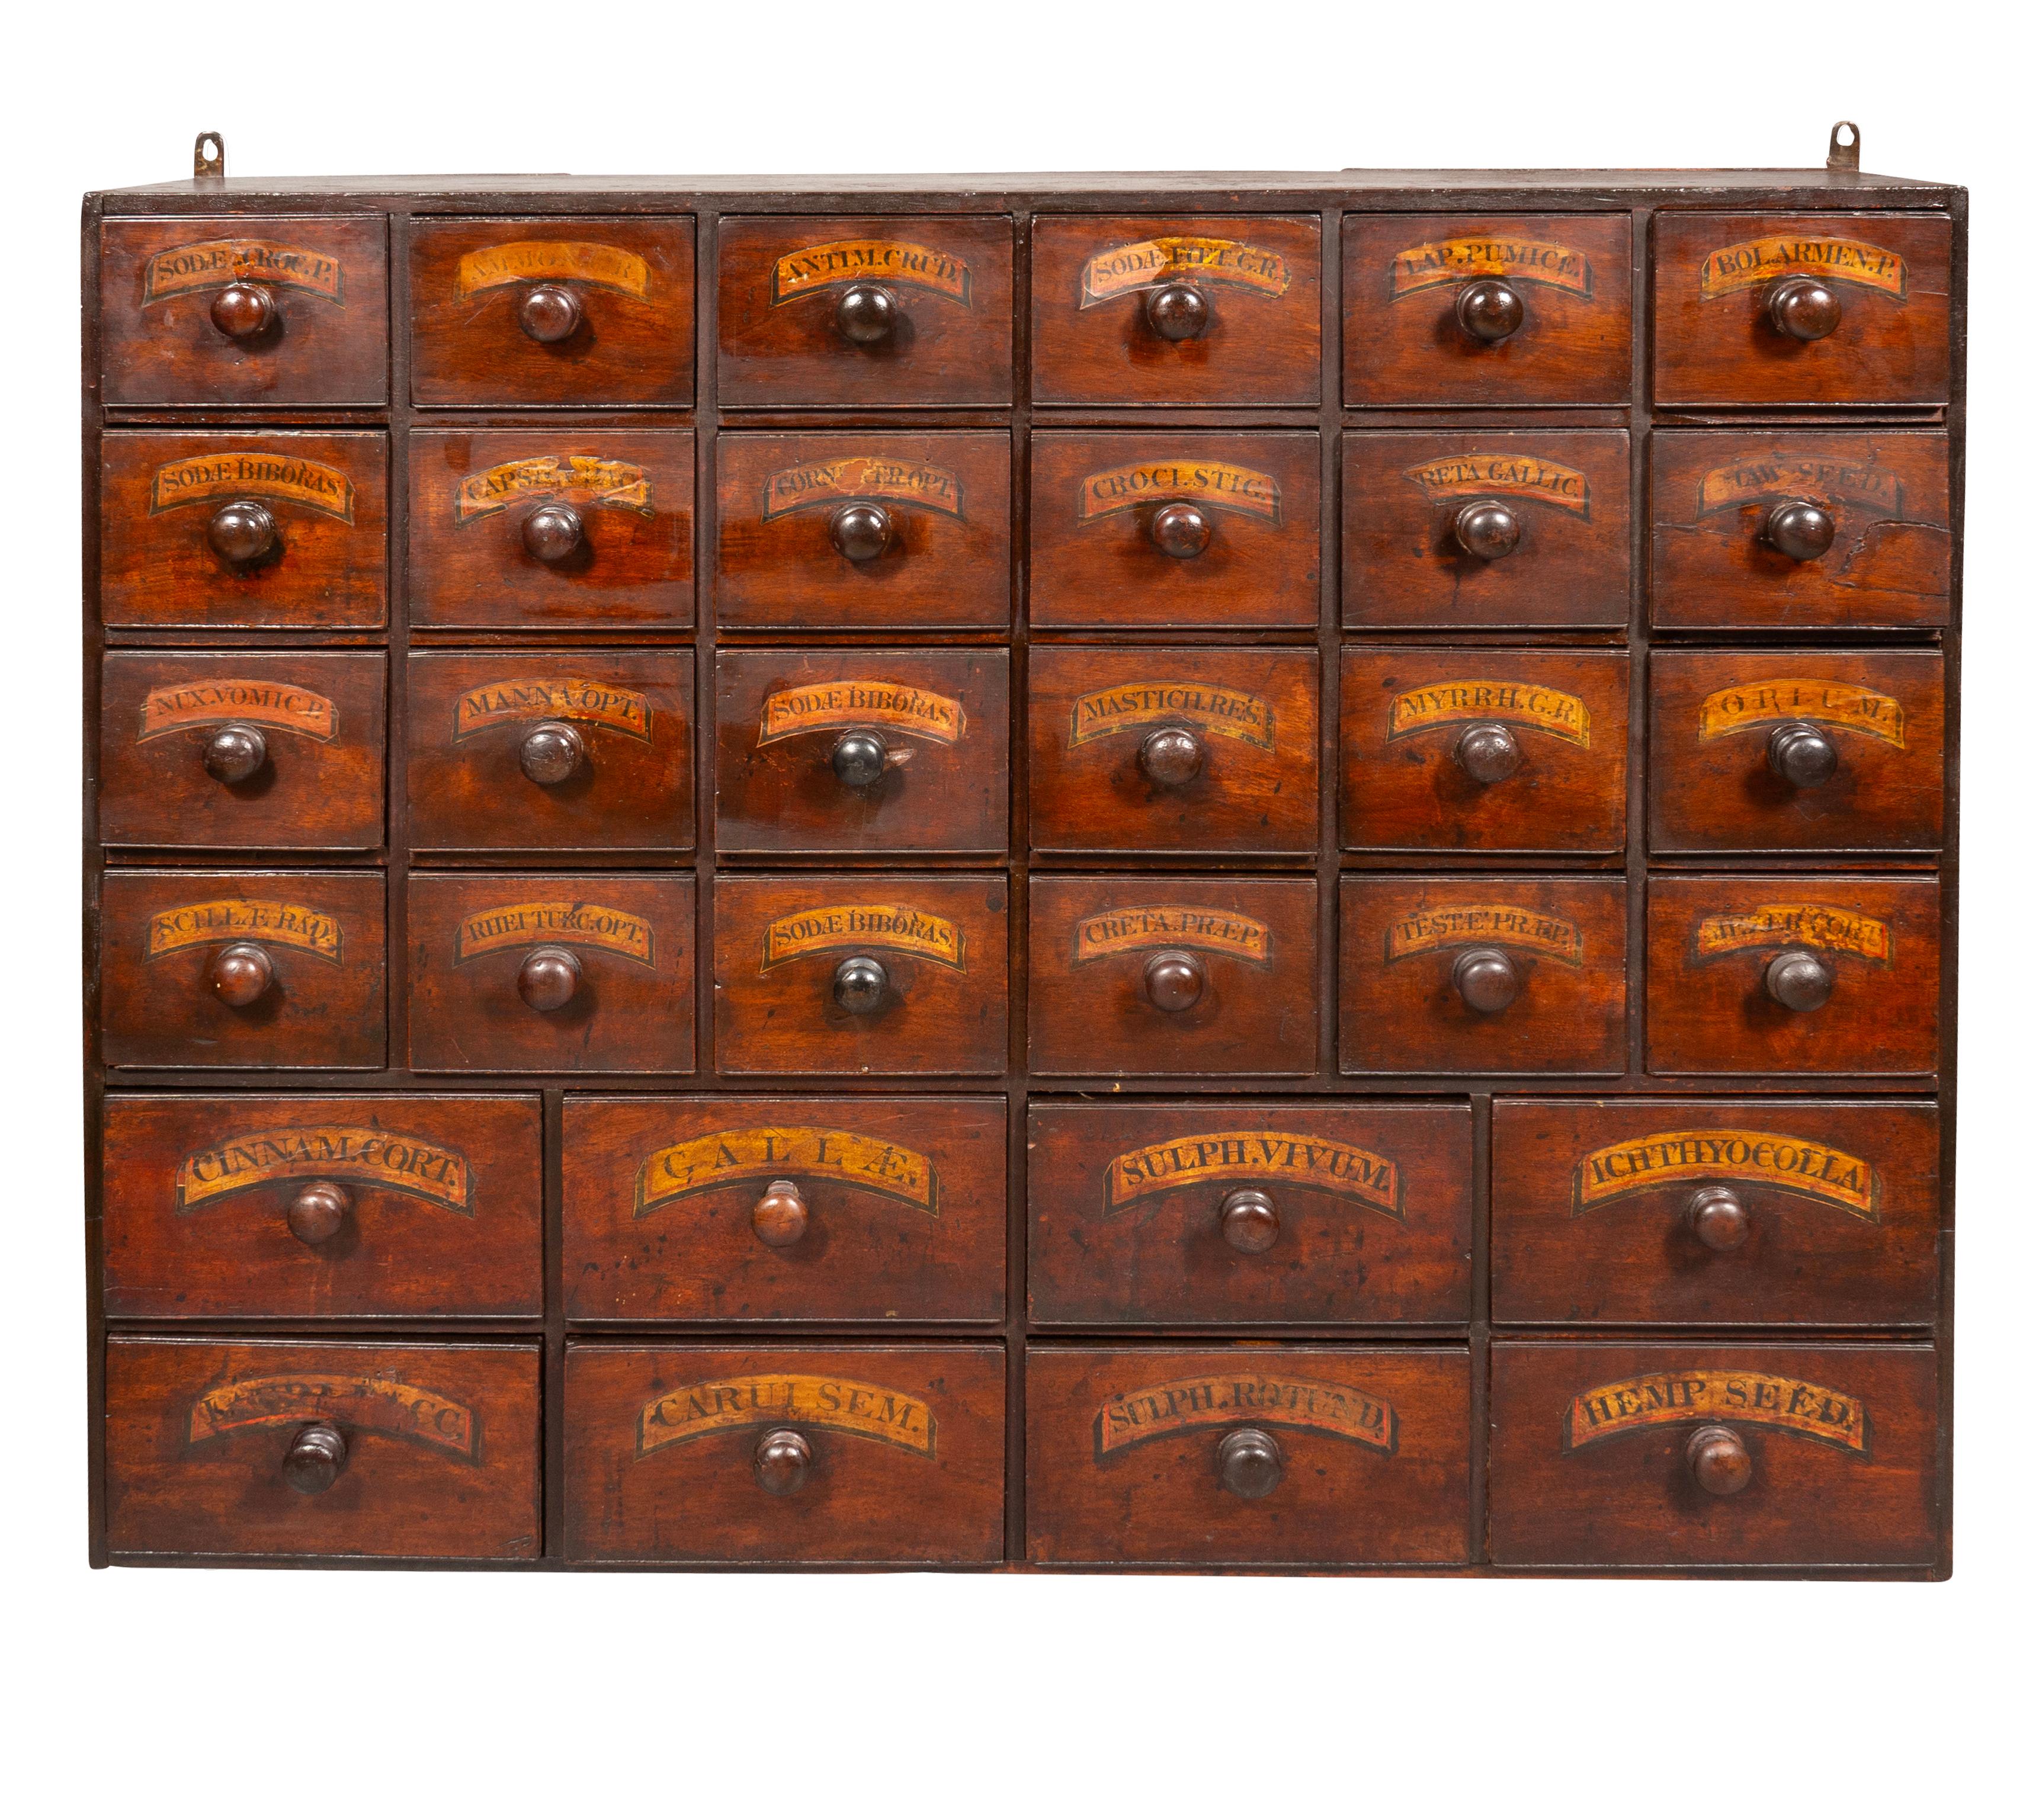 Each rectangular with multiple drawers with wood knobs and paper labels. From the estate of the founder of Yankee Candle Company.